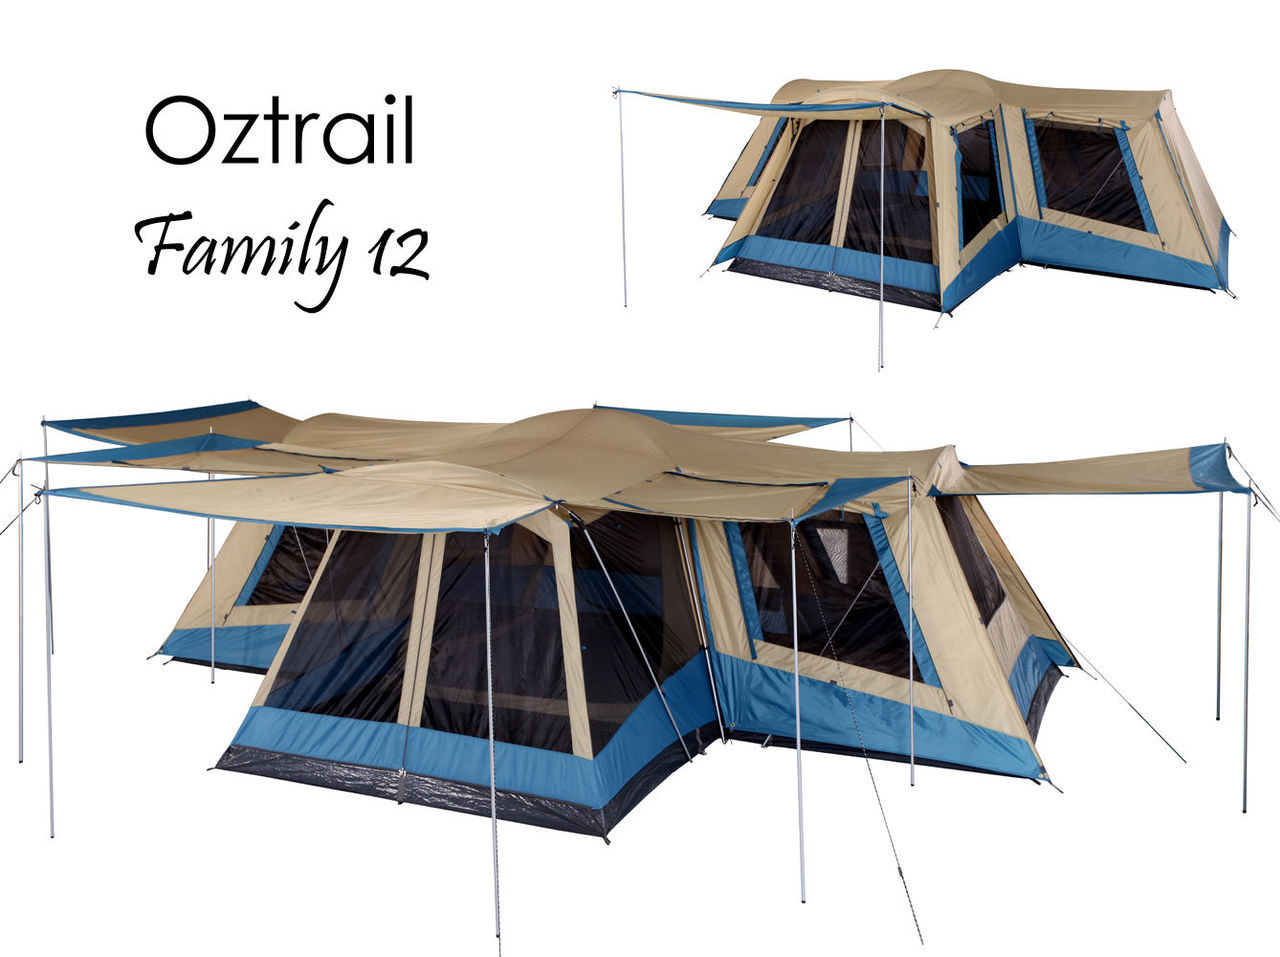 family dome tent